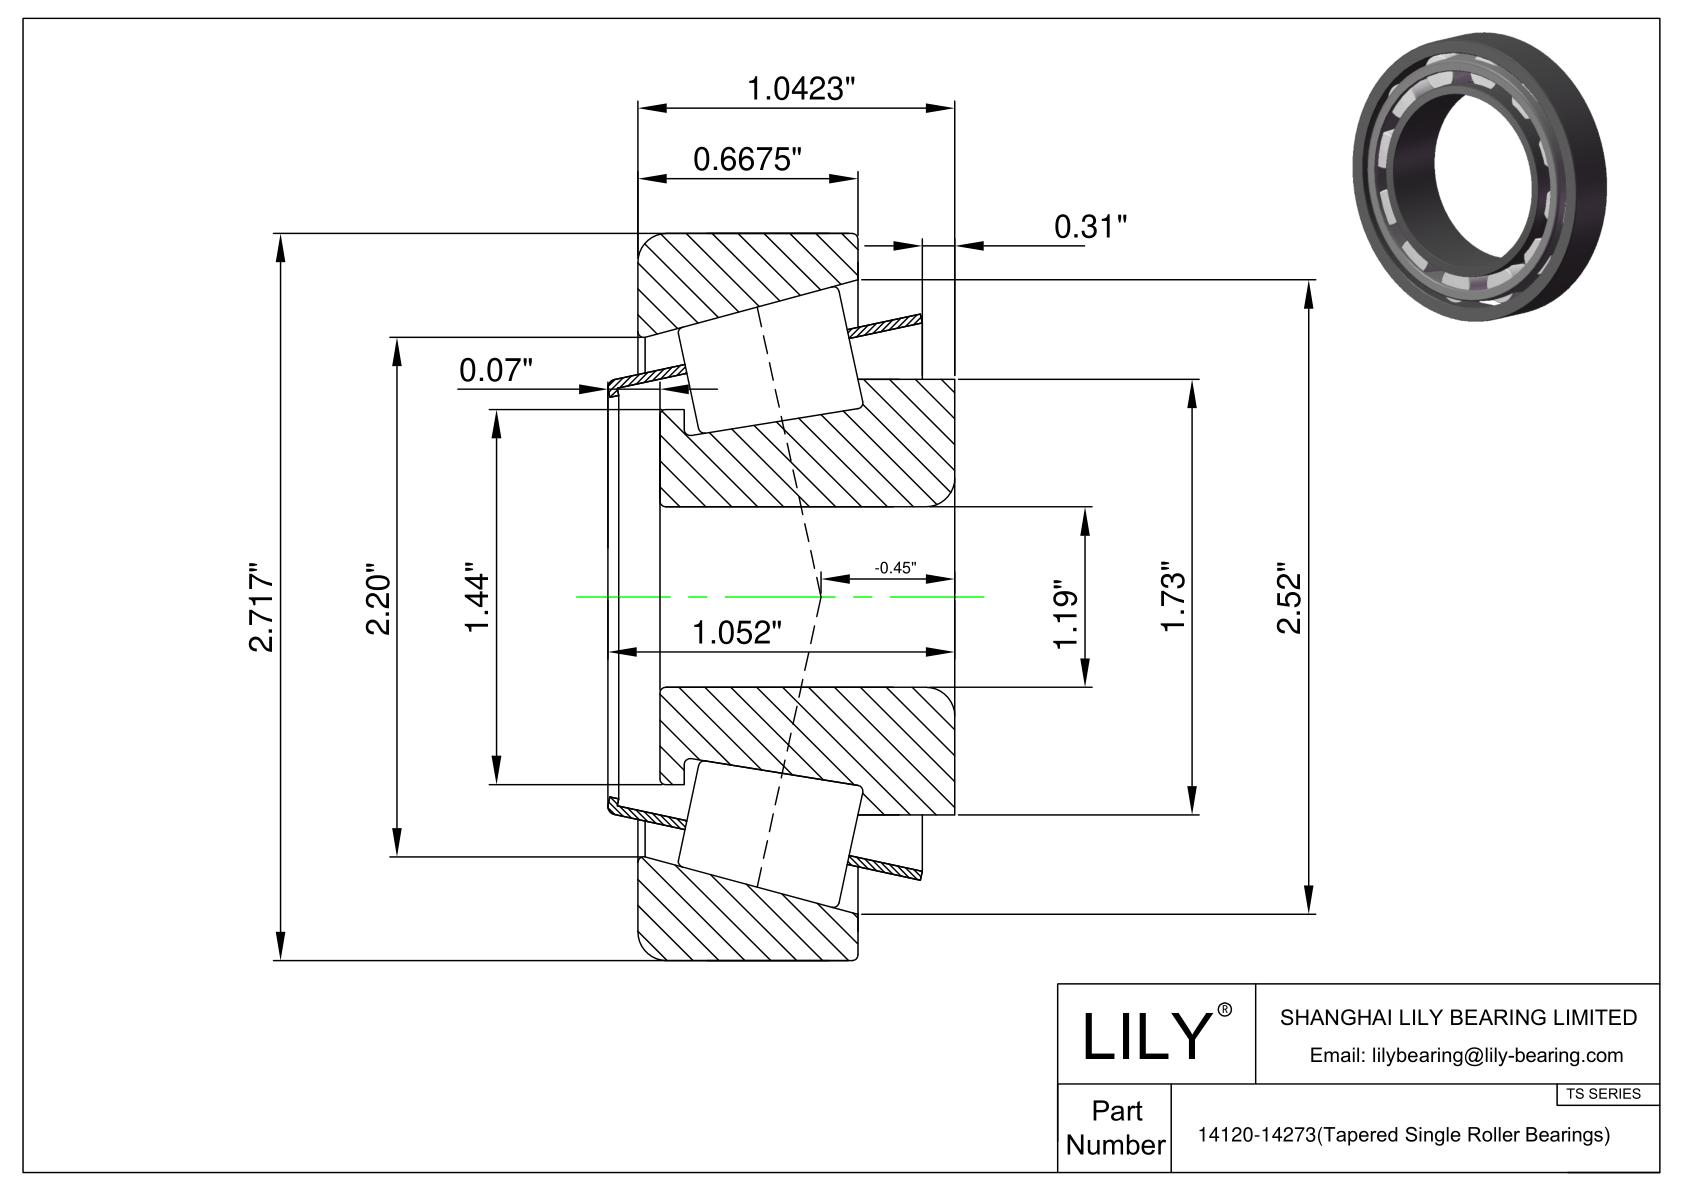 14120-14273 TS (Tapered Single Roller Bearings) (Imperial) cad drawing